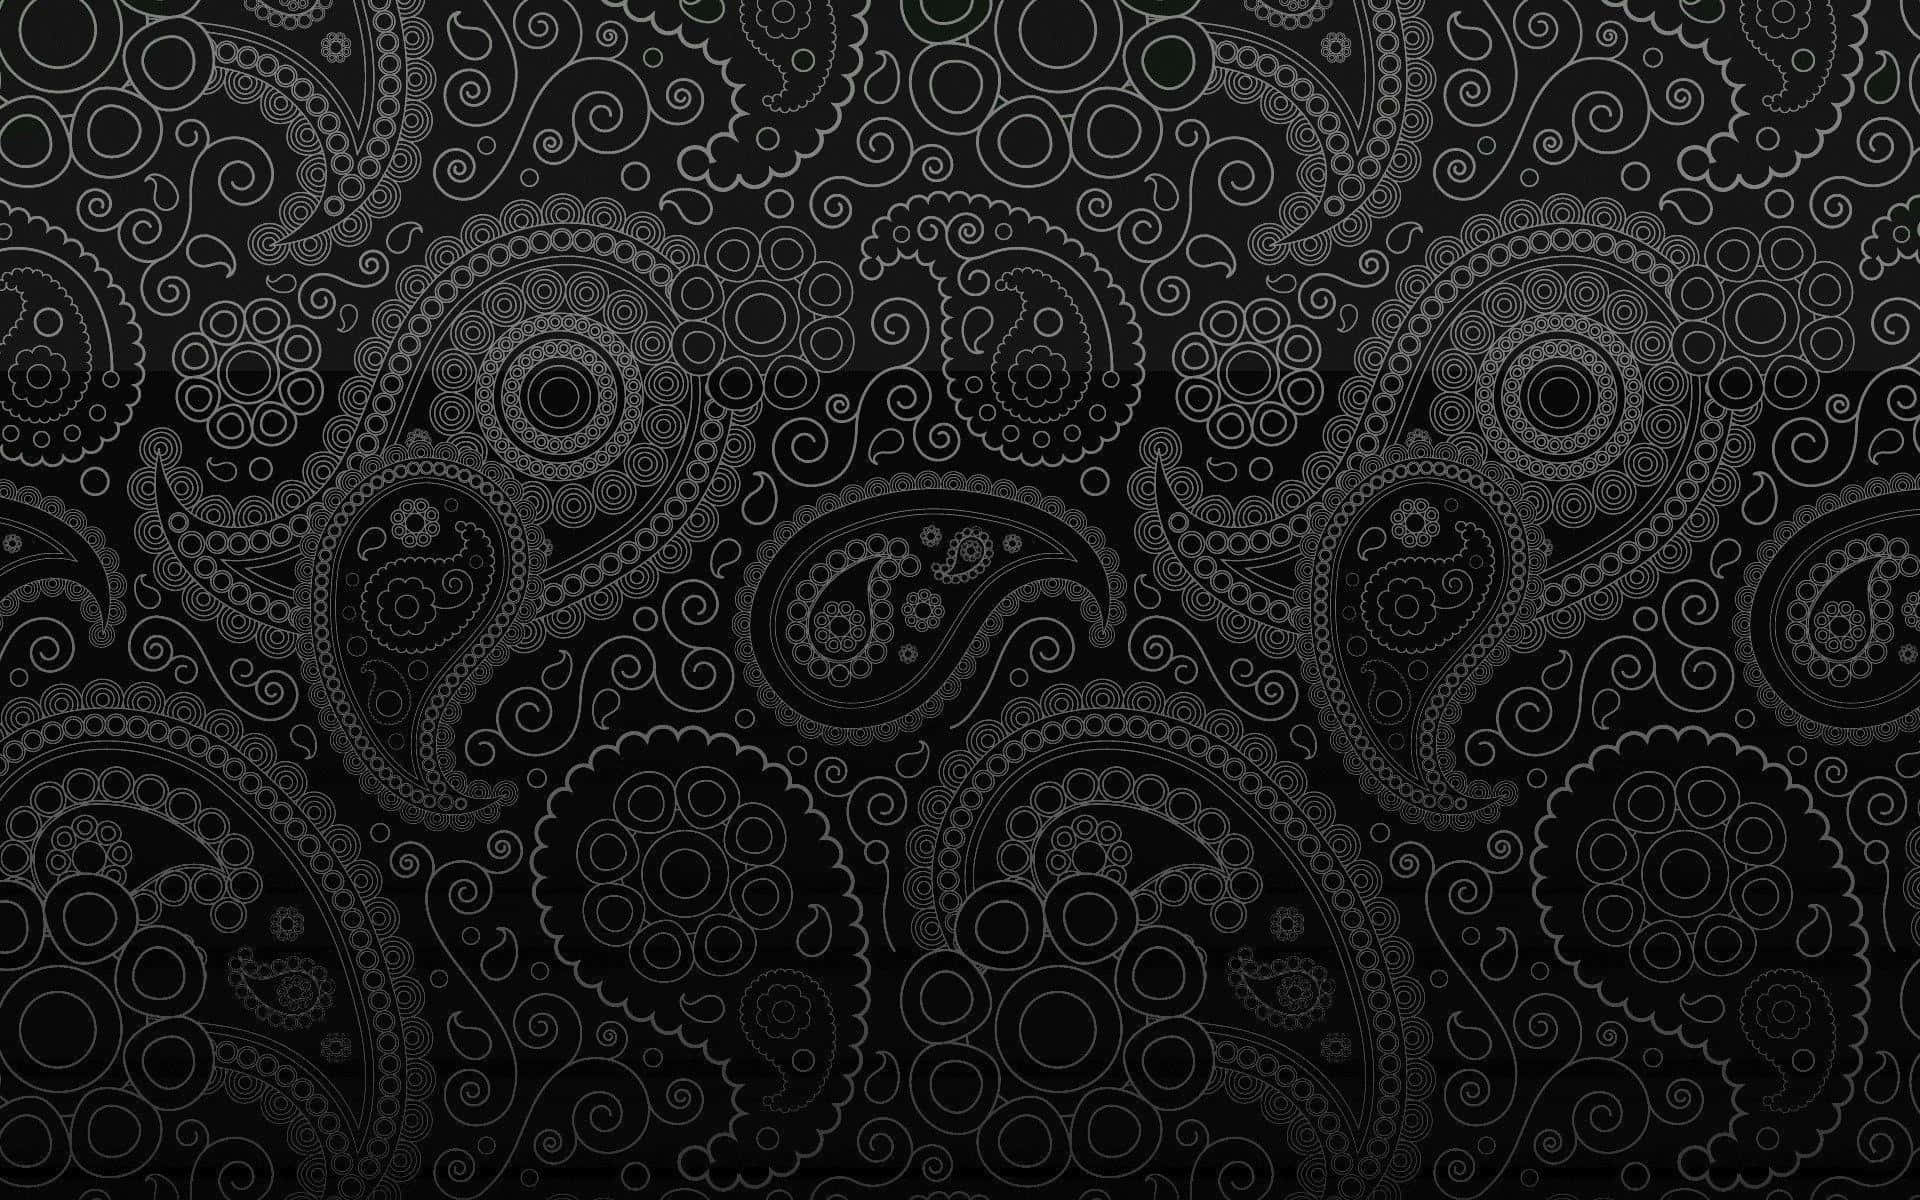 A Black Paisley Wallpaper With A Lot Of Swirls Wallpaper